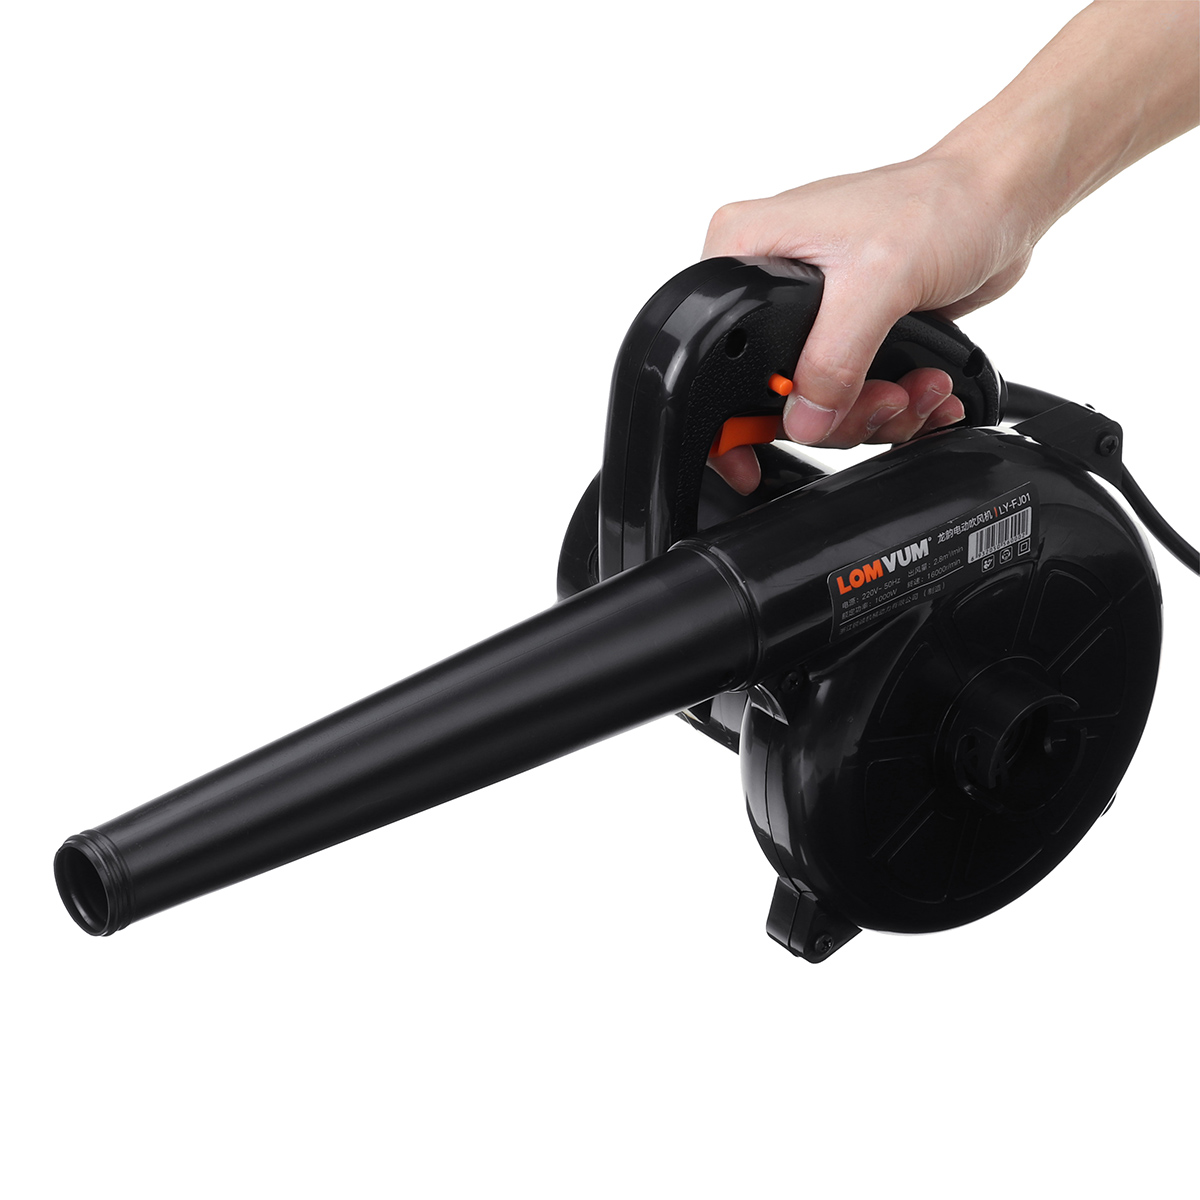 1000W-220V-2-in-1-Electric-Air-Blower-16000rmin-Handheld-Blowing--Dust-Collecting-Mechine-1735961-7